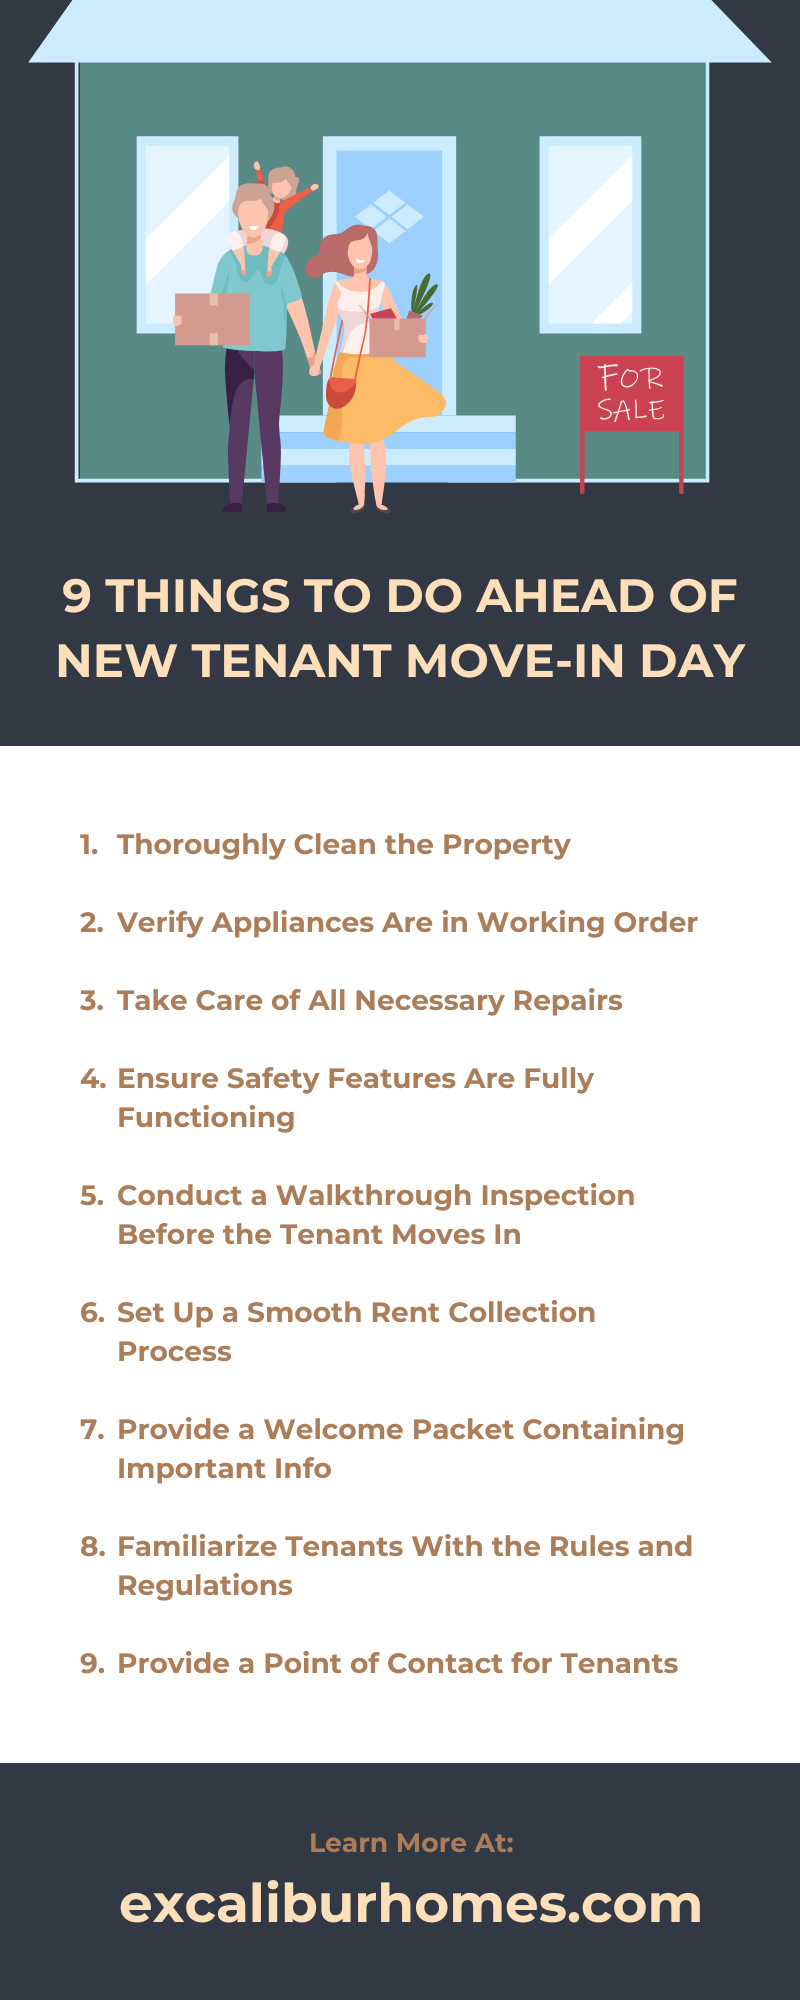 9 Things To Do Ahead of New Tenant Move-in Day